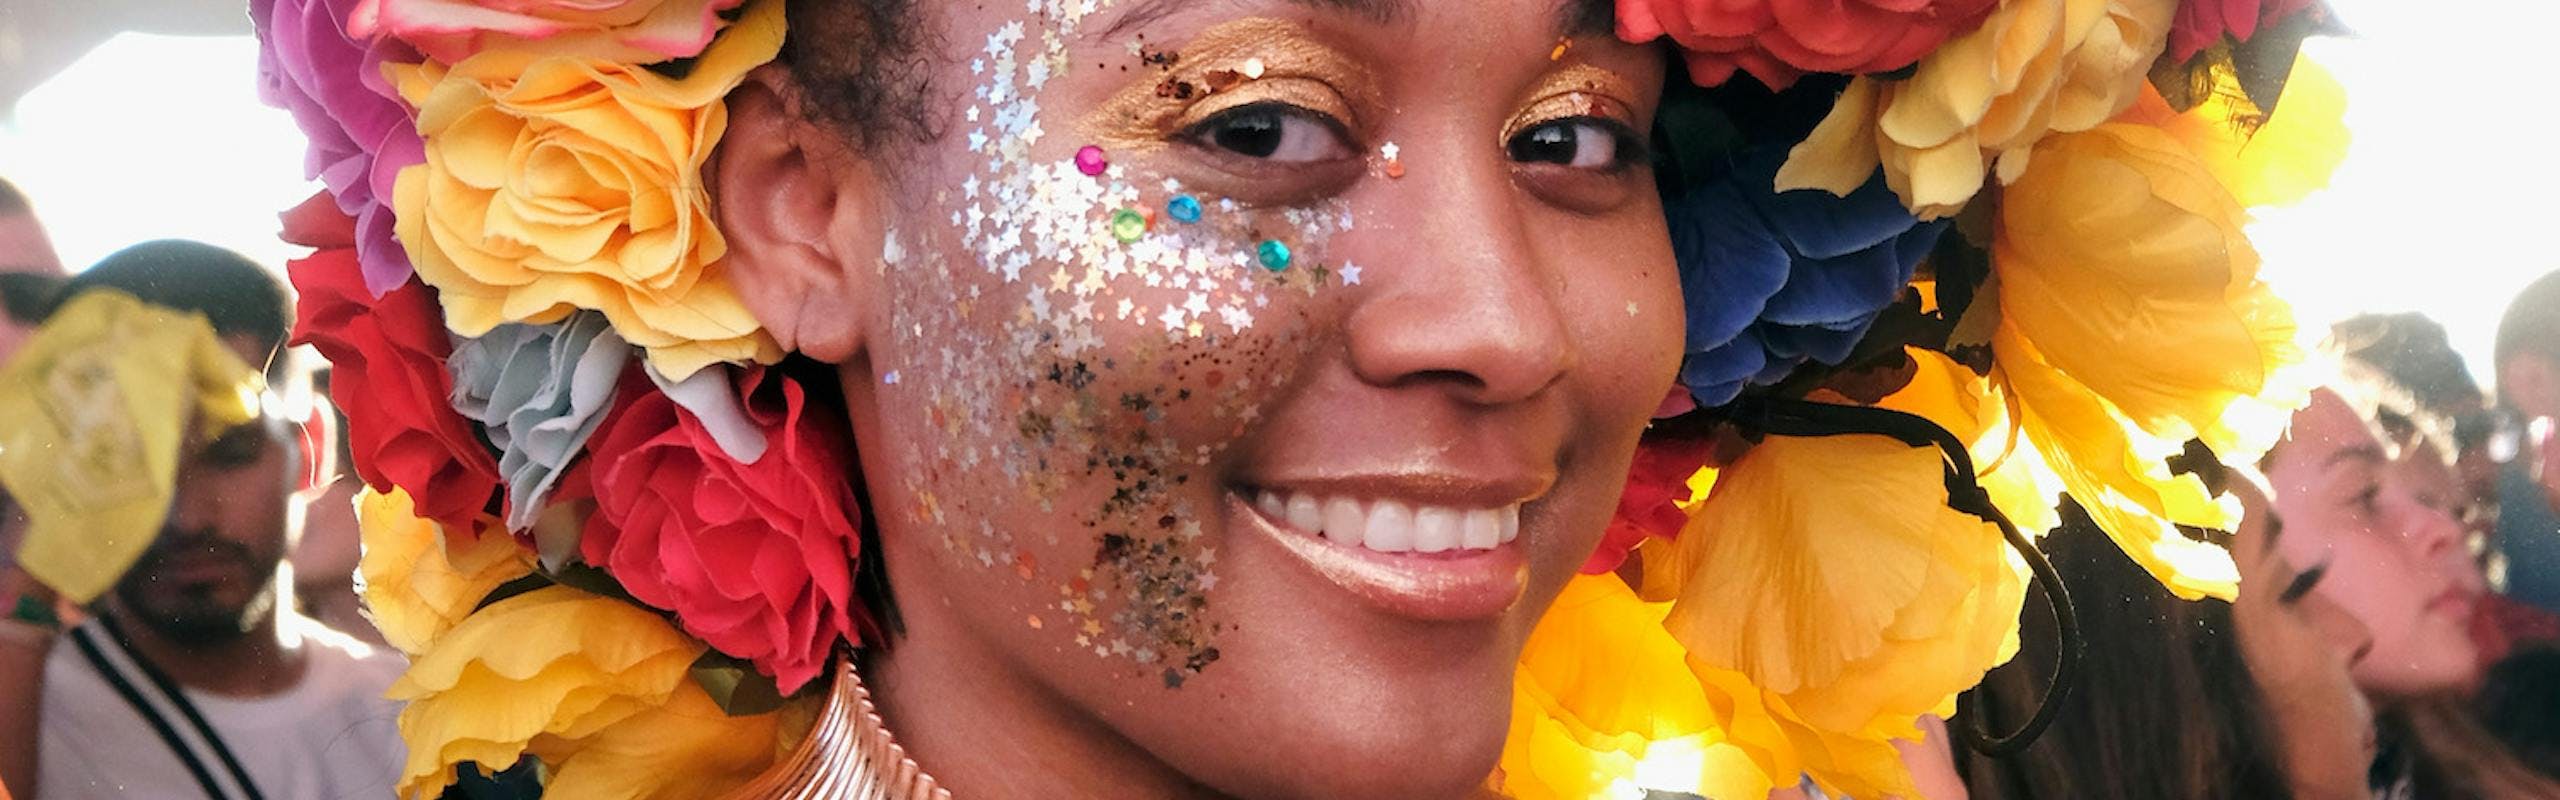 Coachella attendees with festival makeup and a colorful flower hat